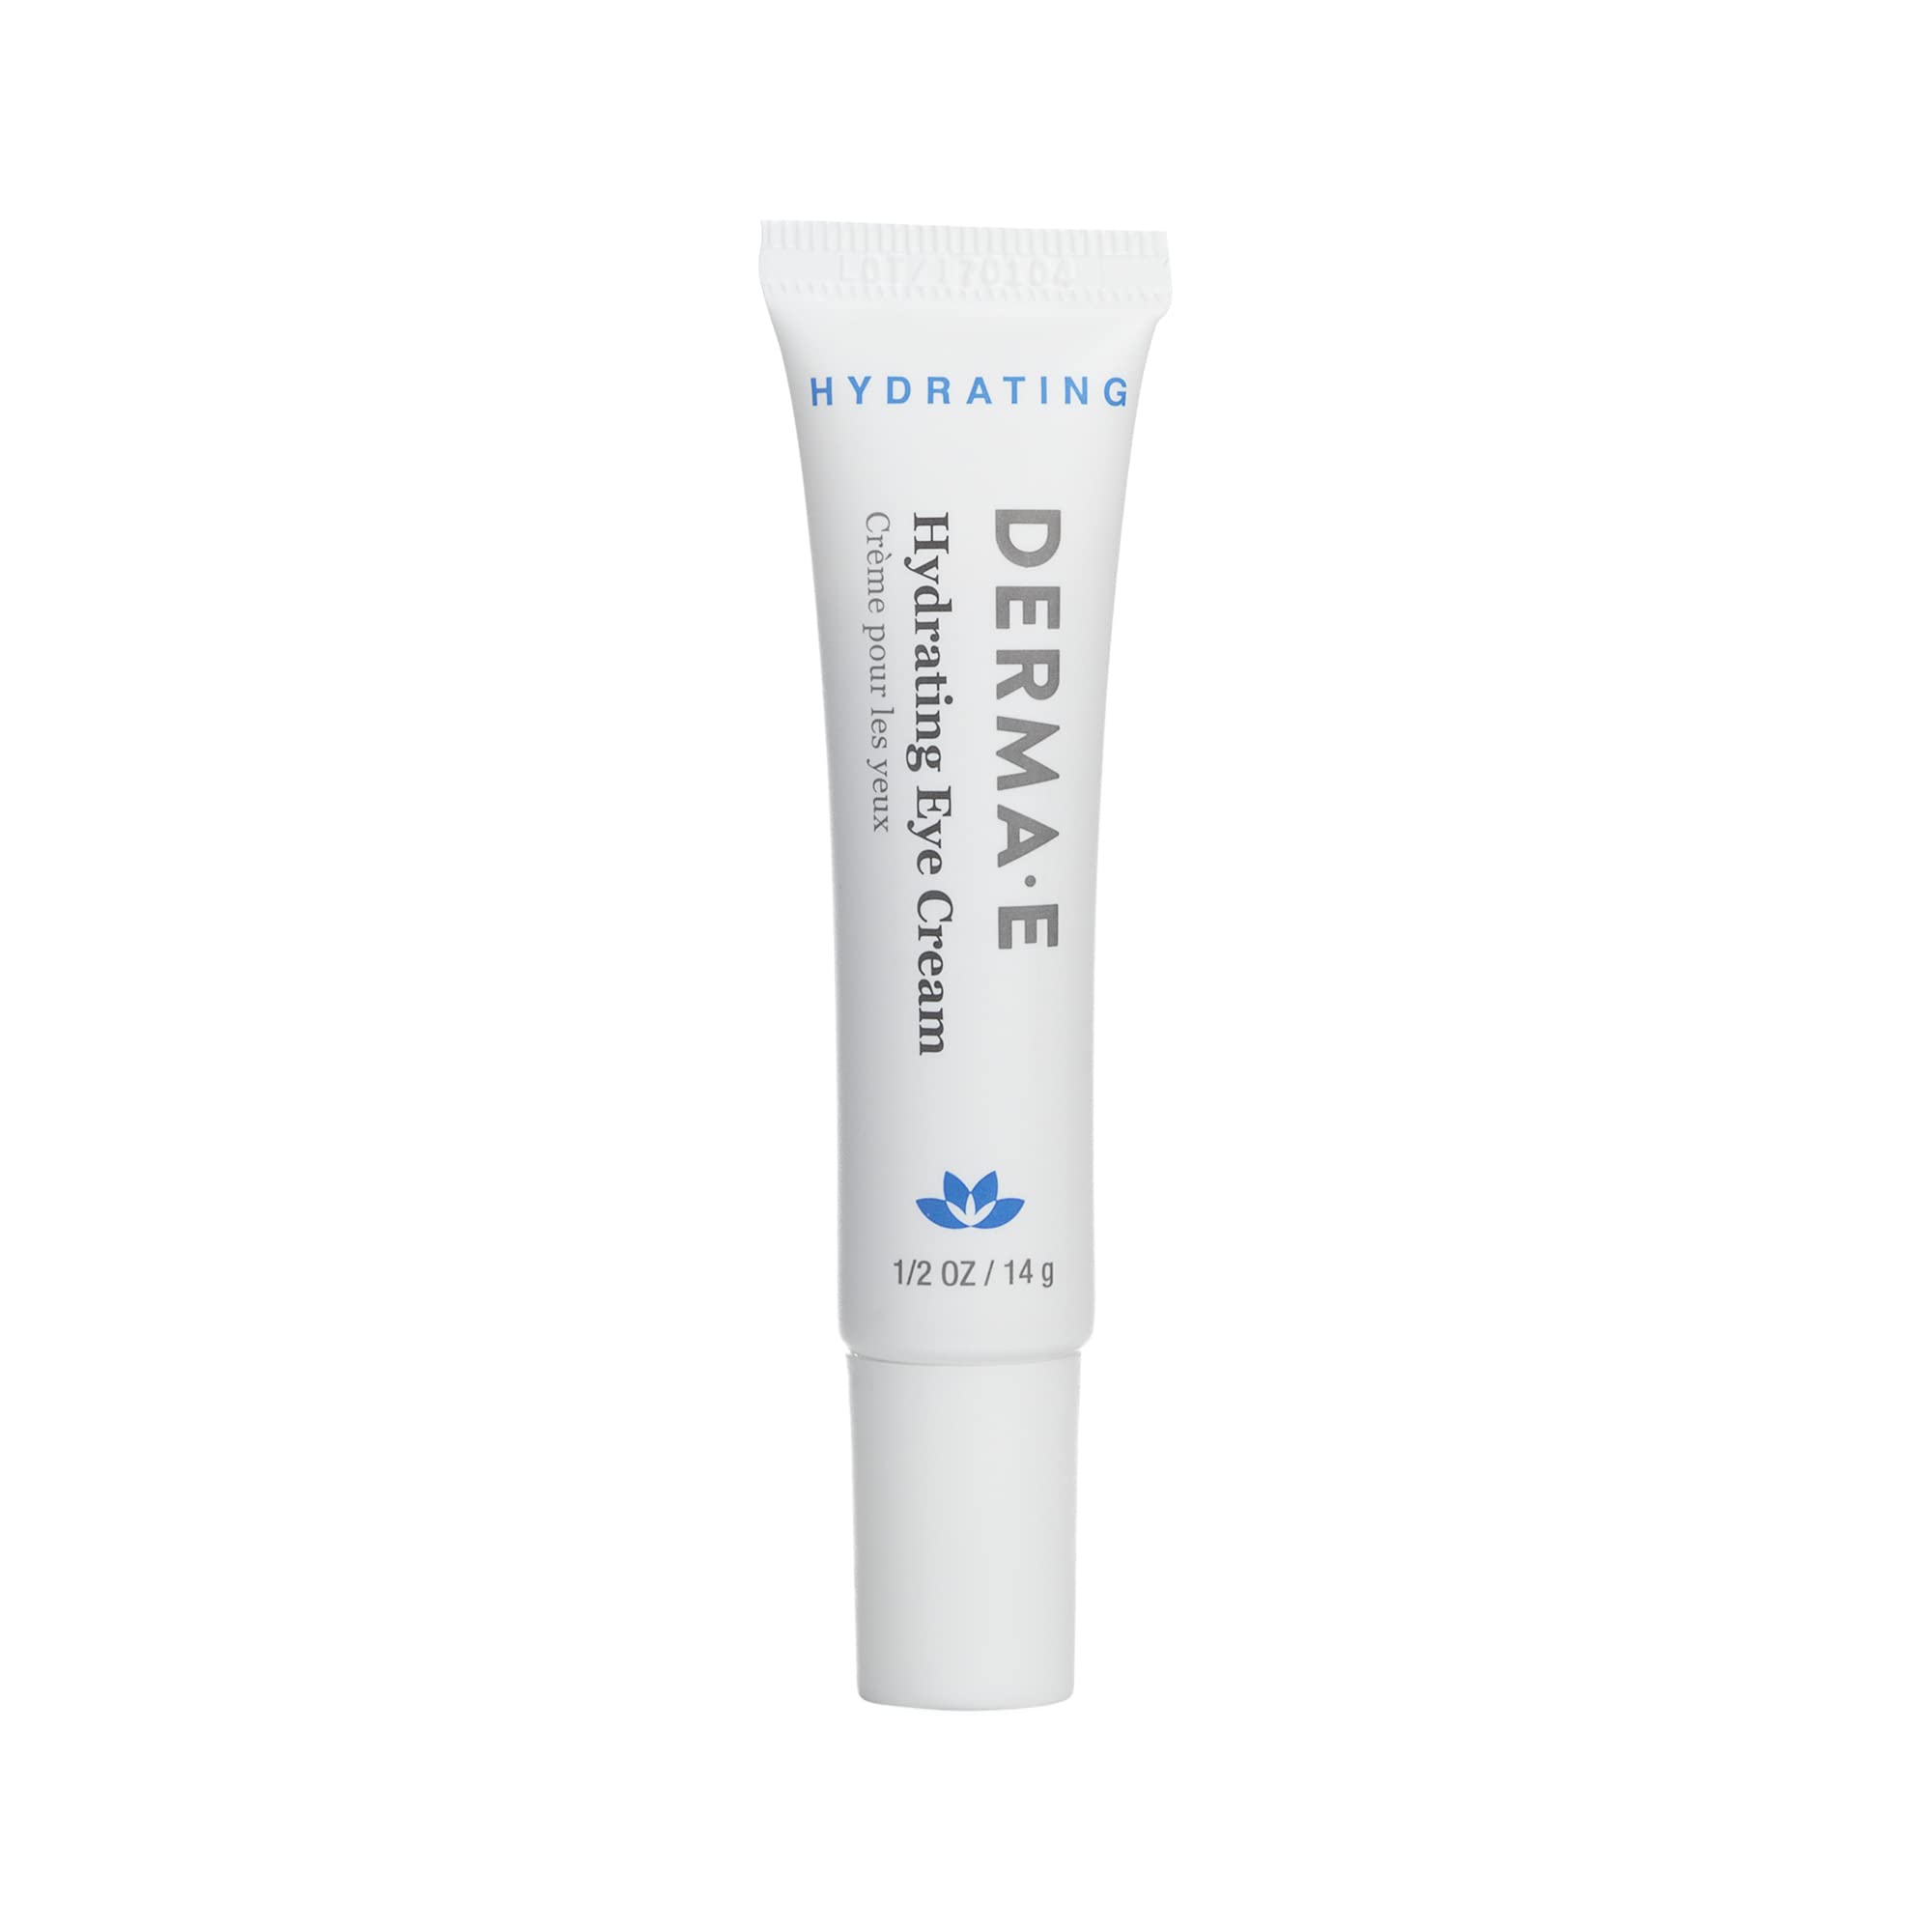 DERMA-E Hydrating Eye Cream – Firming and Lifting Hyaluronic Acid Treatment - Under Eye and Upper Eyelid Cream Reduces Puffiness and Appearance of Fine Lines, 0.5 oz